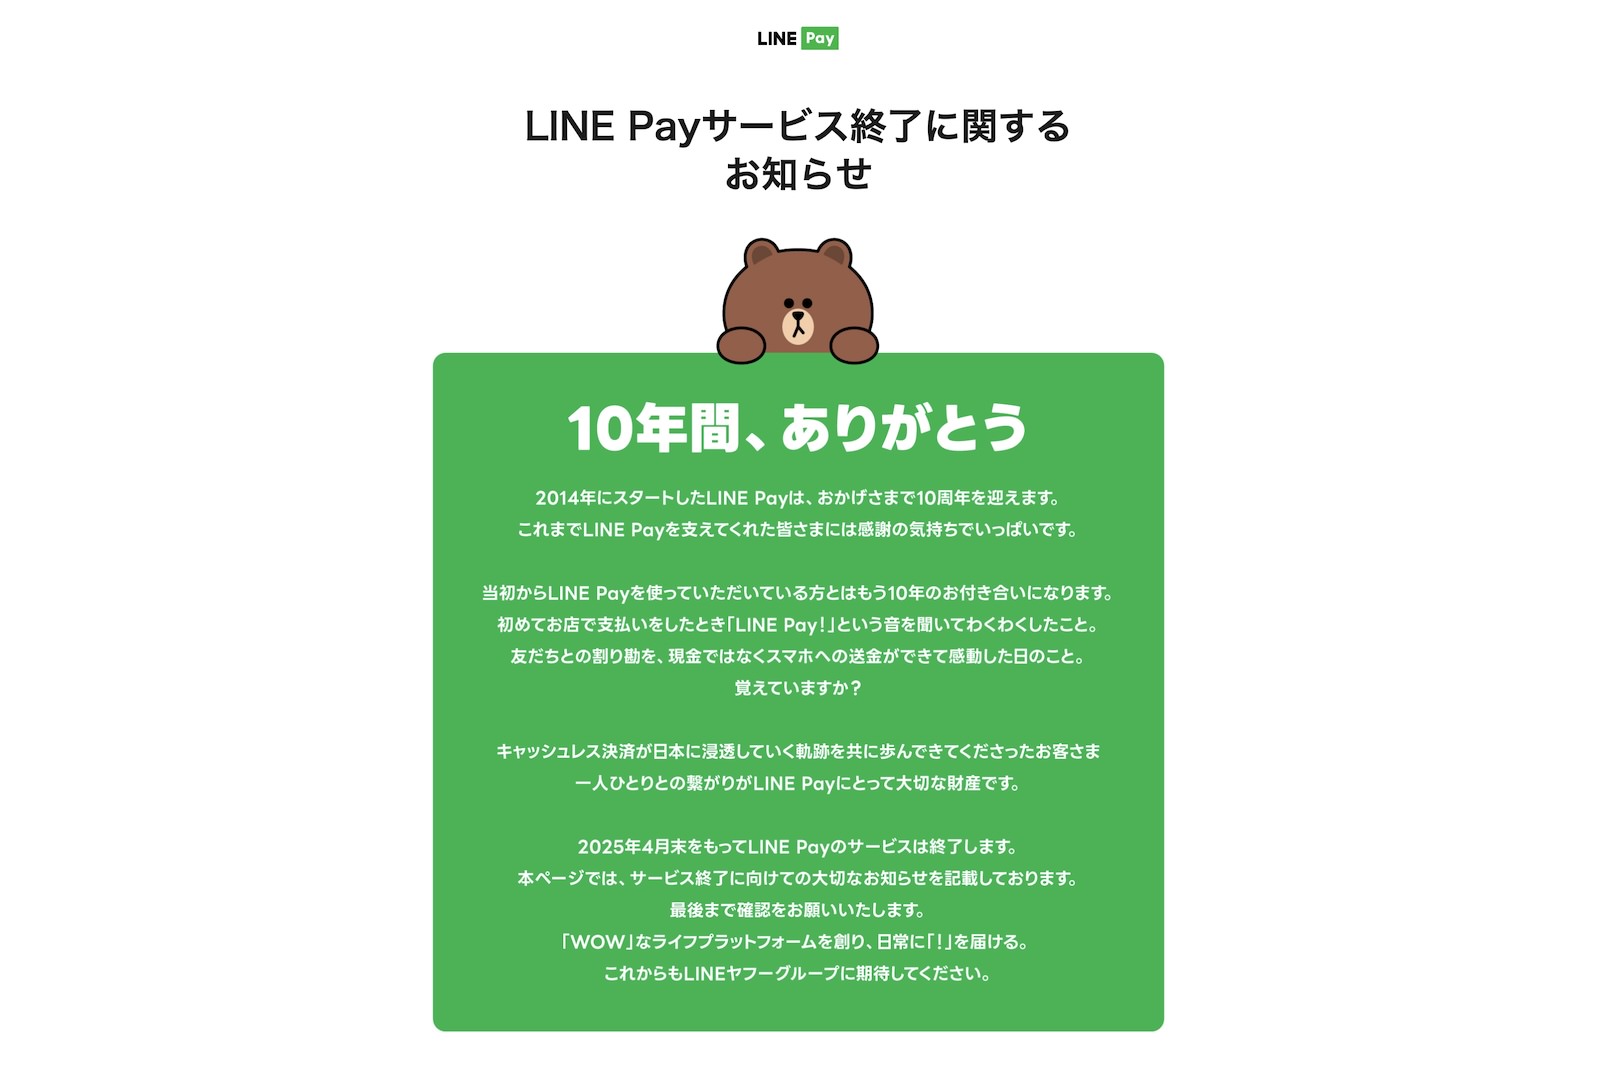 LINE Pay ending